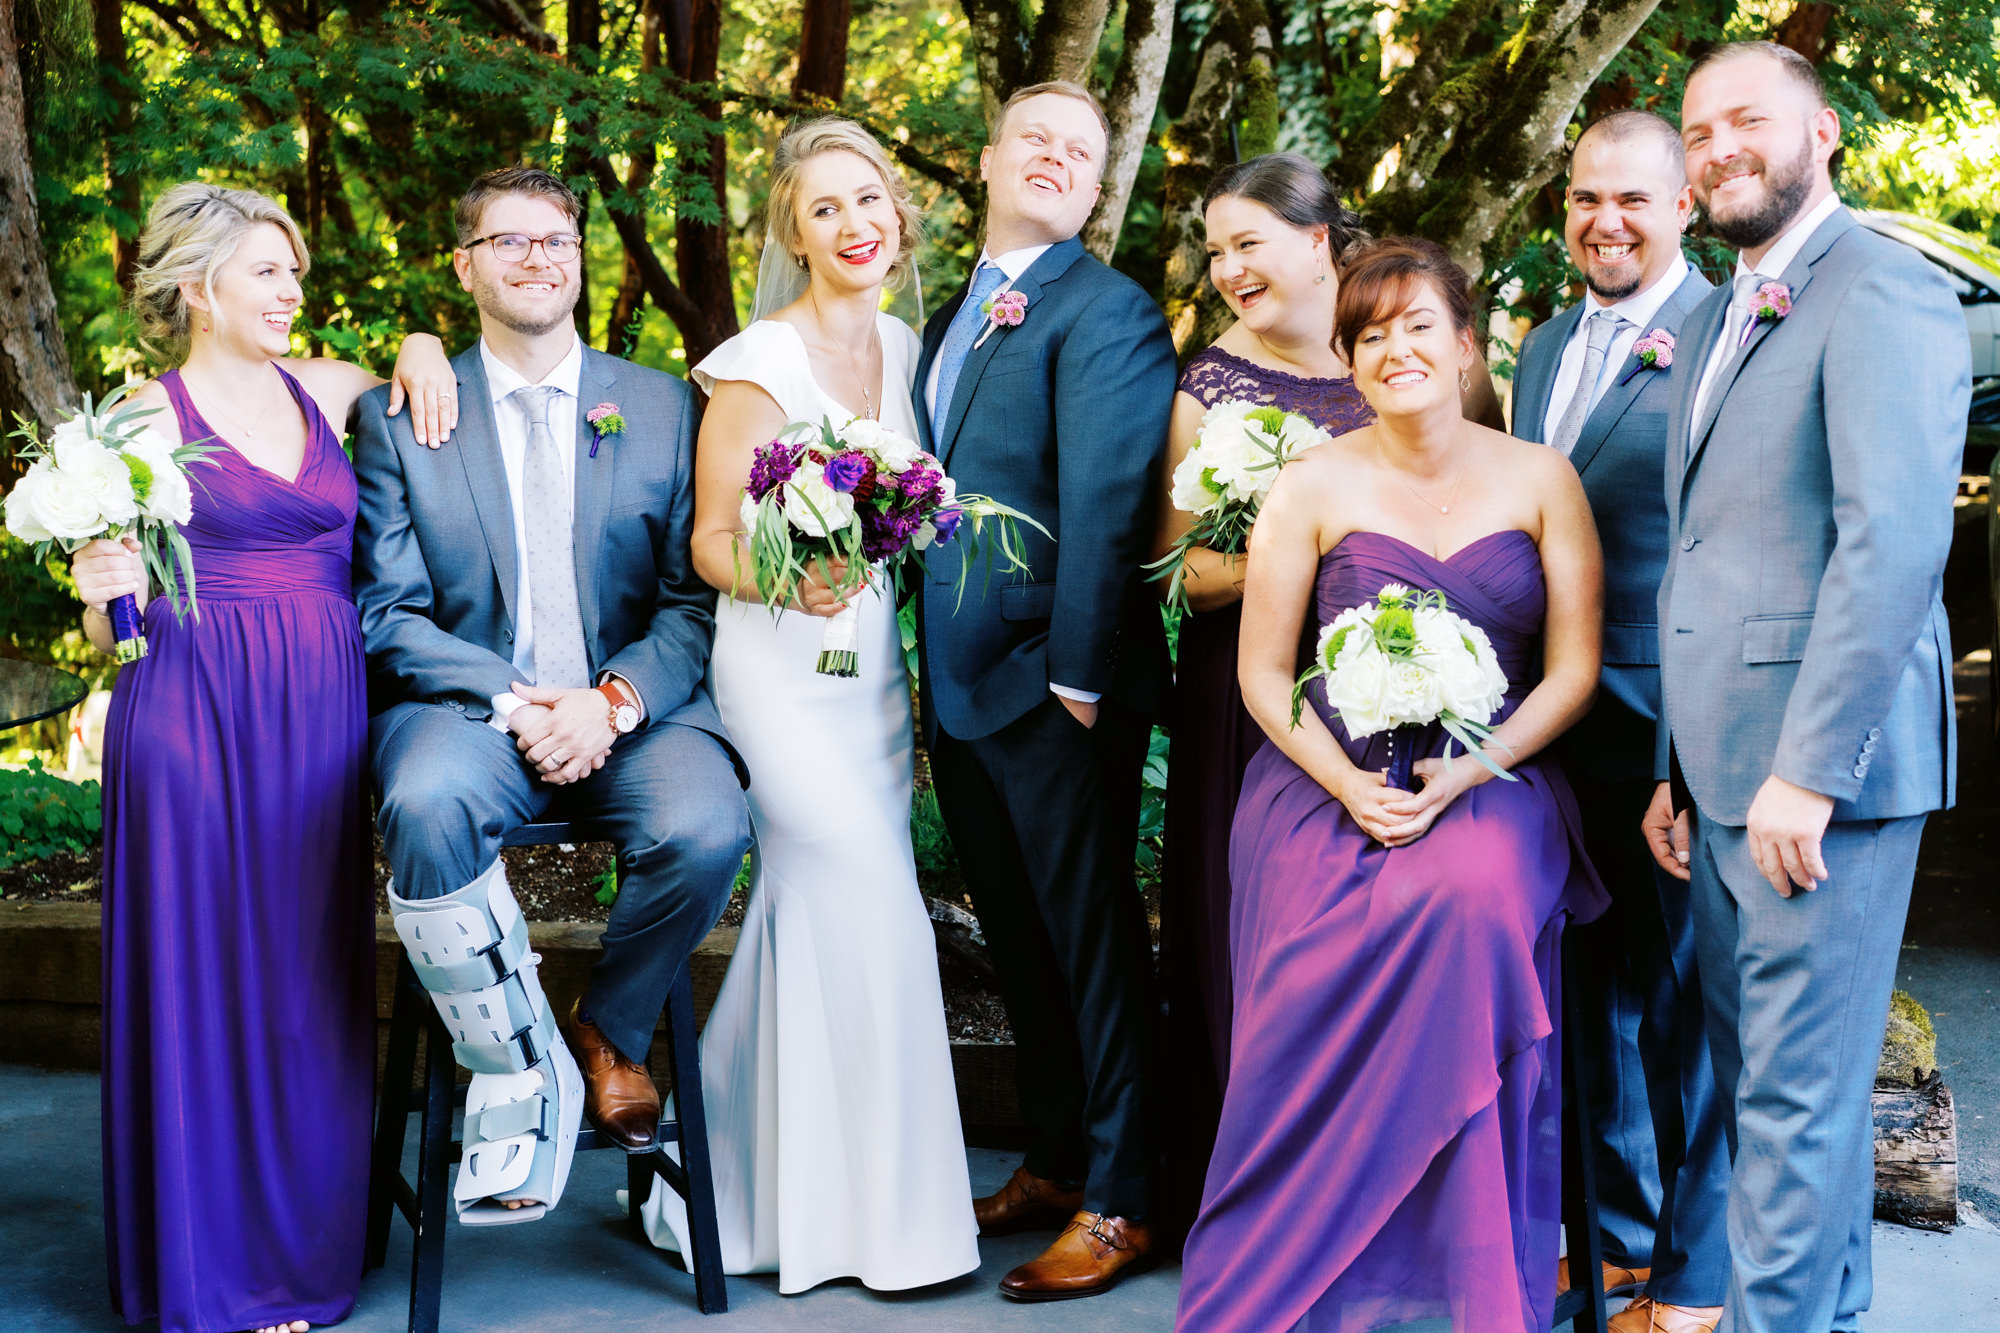 JM Cellars Weddings: Kayley and Brian and wedding party